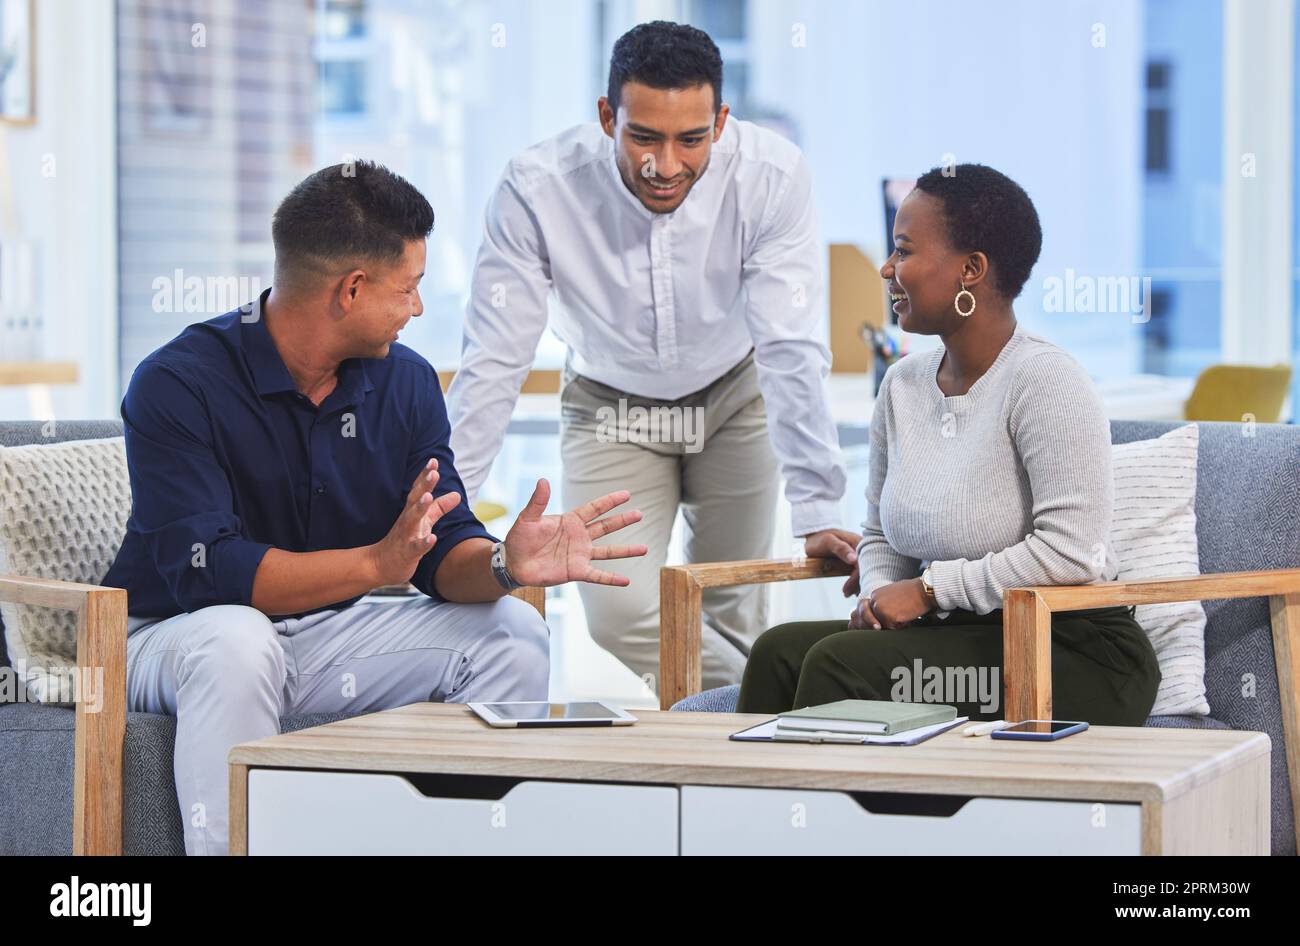 Sharing some office banter. three businesspeople having a conversation in a modern office Stock Photo